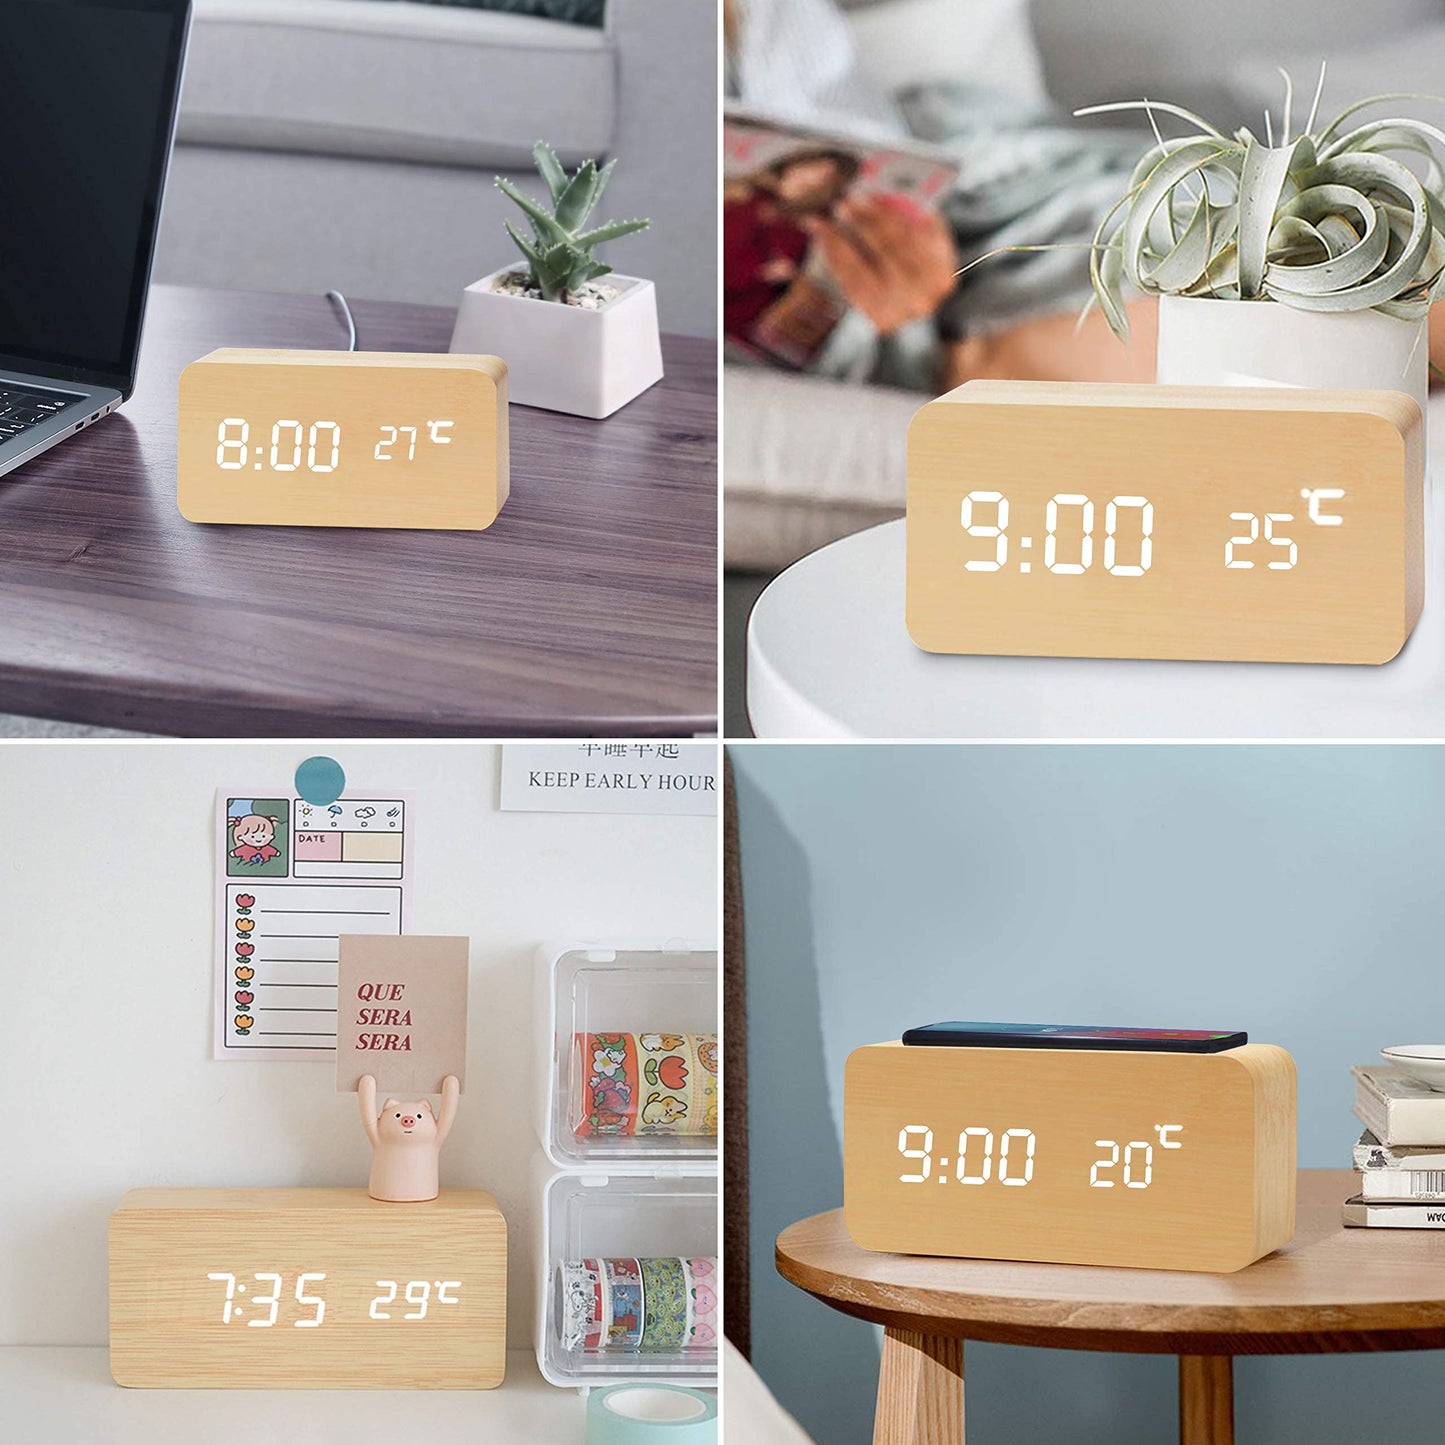 ELECDON Wooden Alarm Clock with Wireless Charging Pad, LED Digital Clock with Large Date and Temperature Display, Sound Control, Adjustable Brightness, Suitable for Bedroom, Office, Bedside